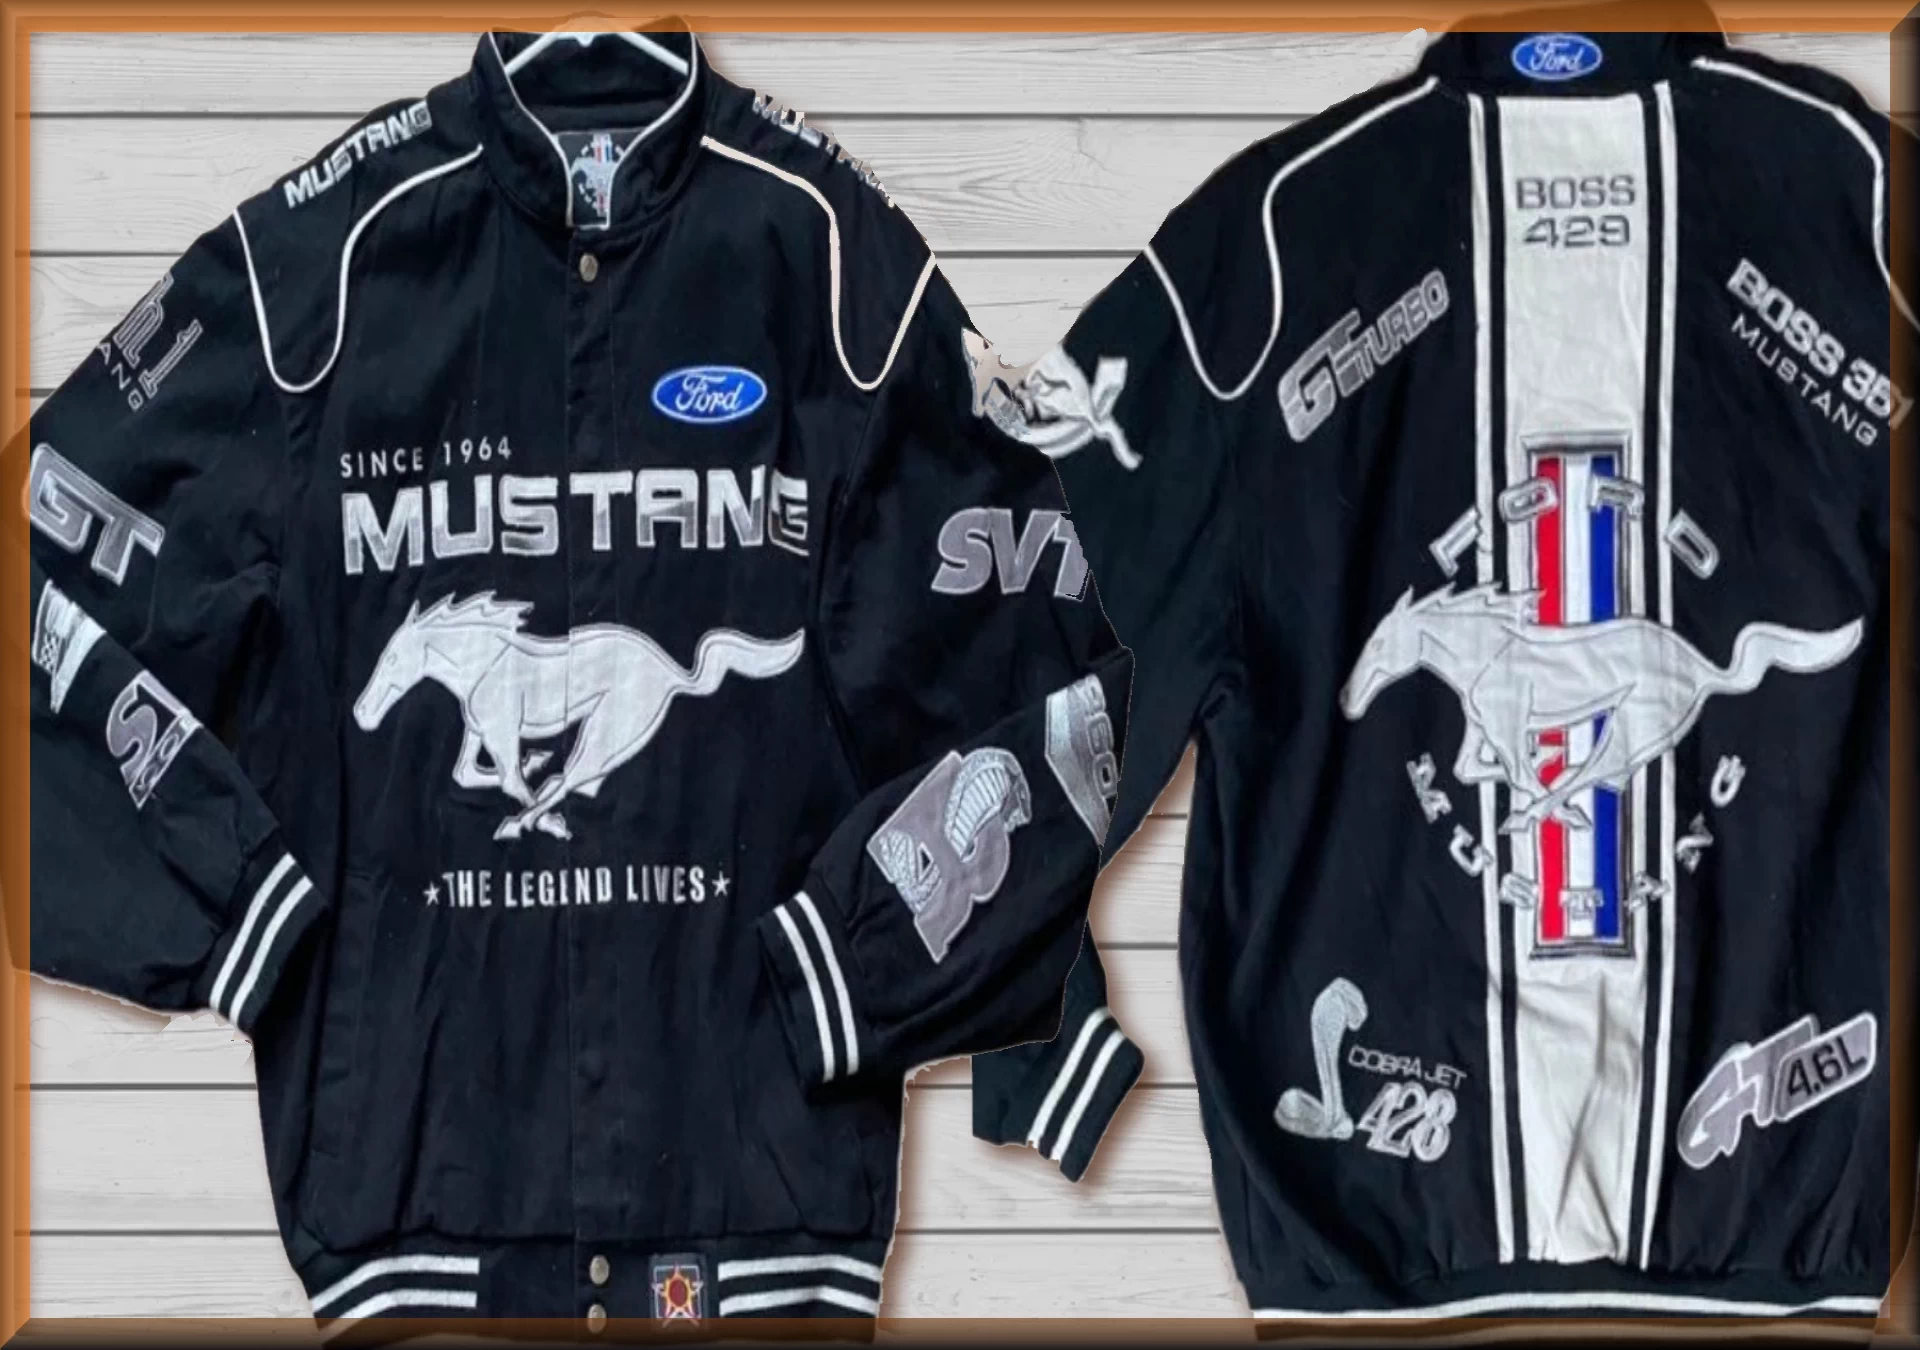 Mustang FAUX LEATHER Adult Motorsports Jacket by JH Design